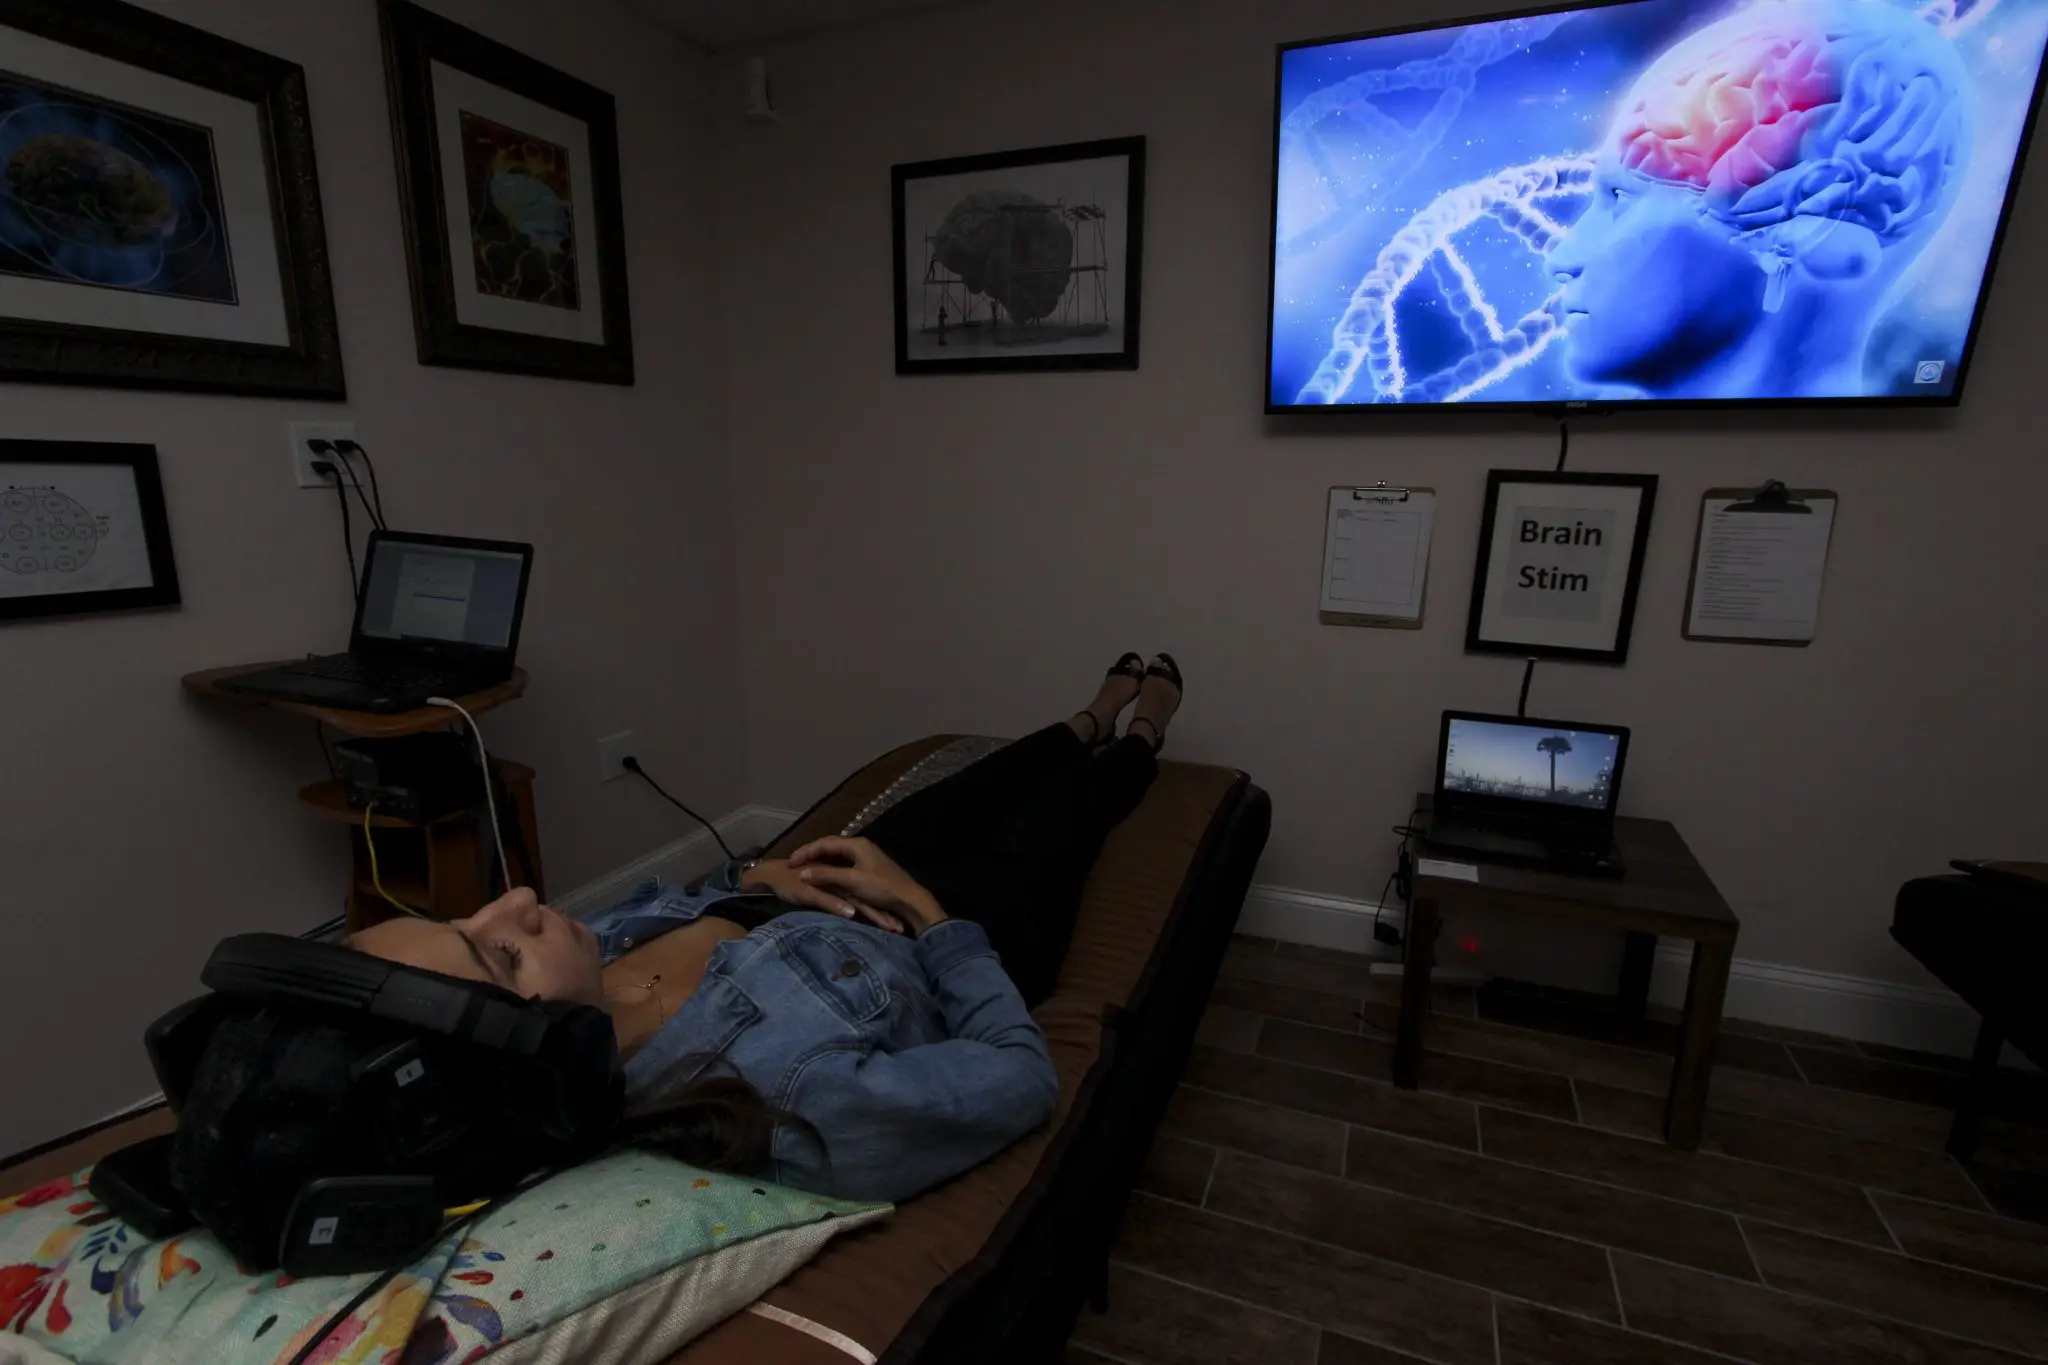 woman lying in brain stimulation chair with headphones on in dimly lit room and TV on wall showing brain graphic